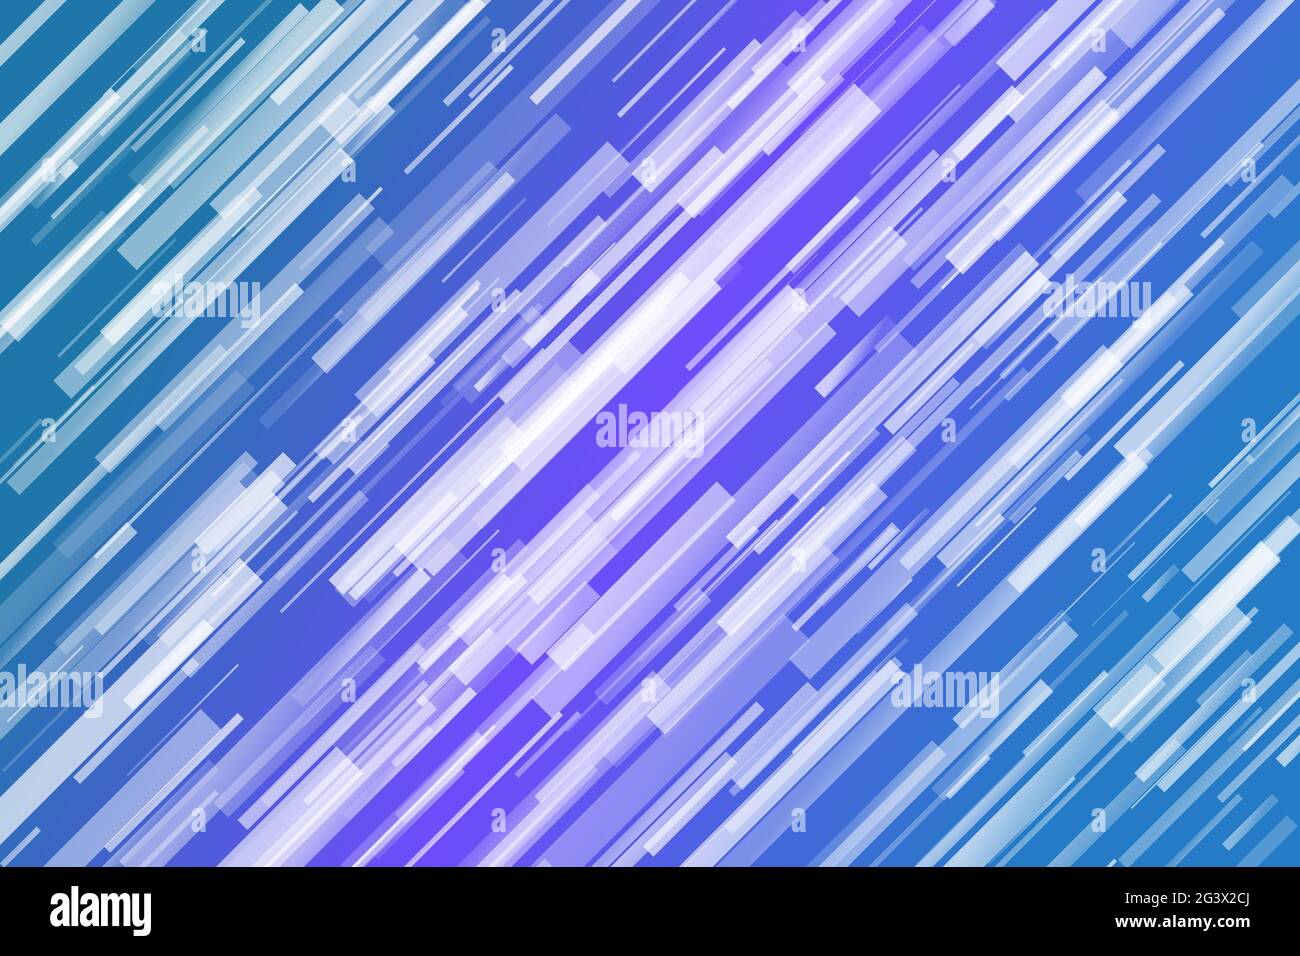 Random gradient modern stripe web background - geometric trendy abstract chaotic vector graphic design with stripes Stock Vector